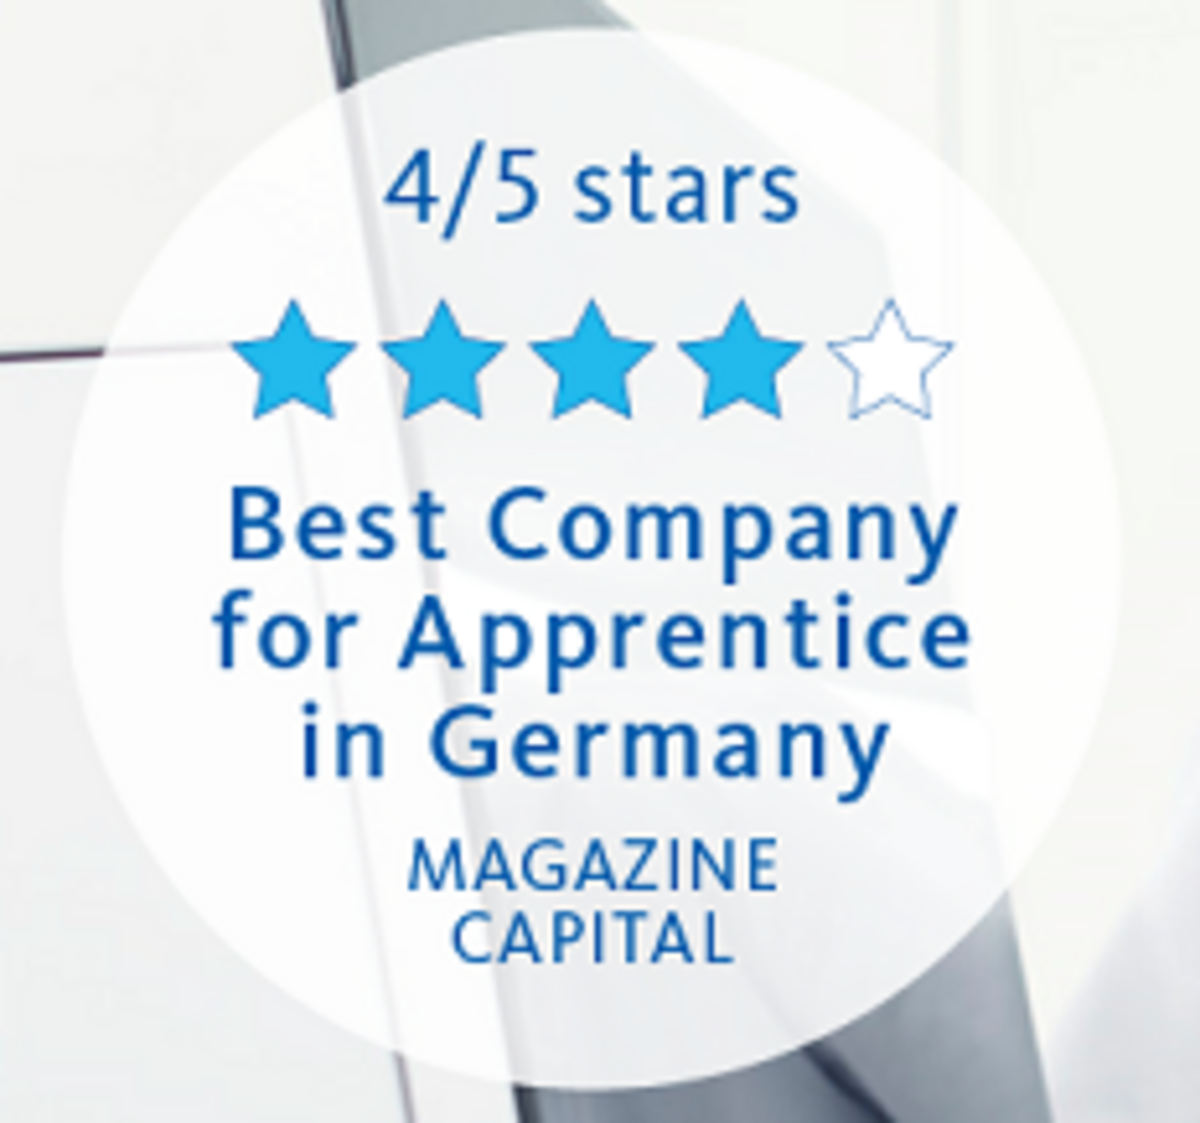 Best company for Apprentice in Germany